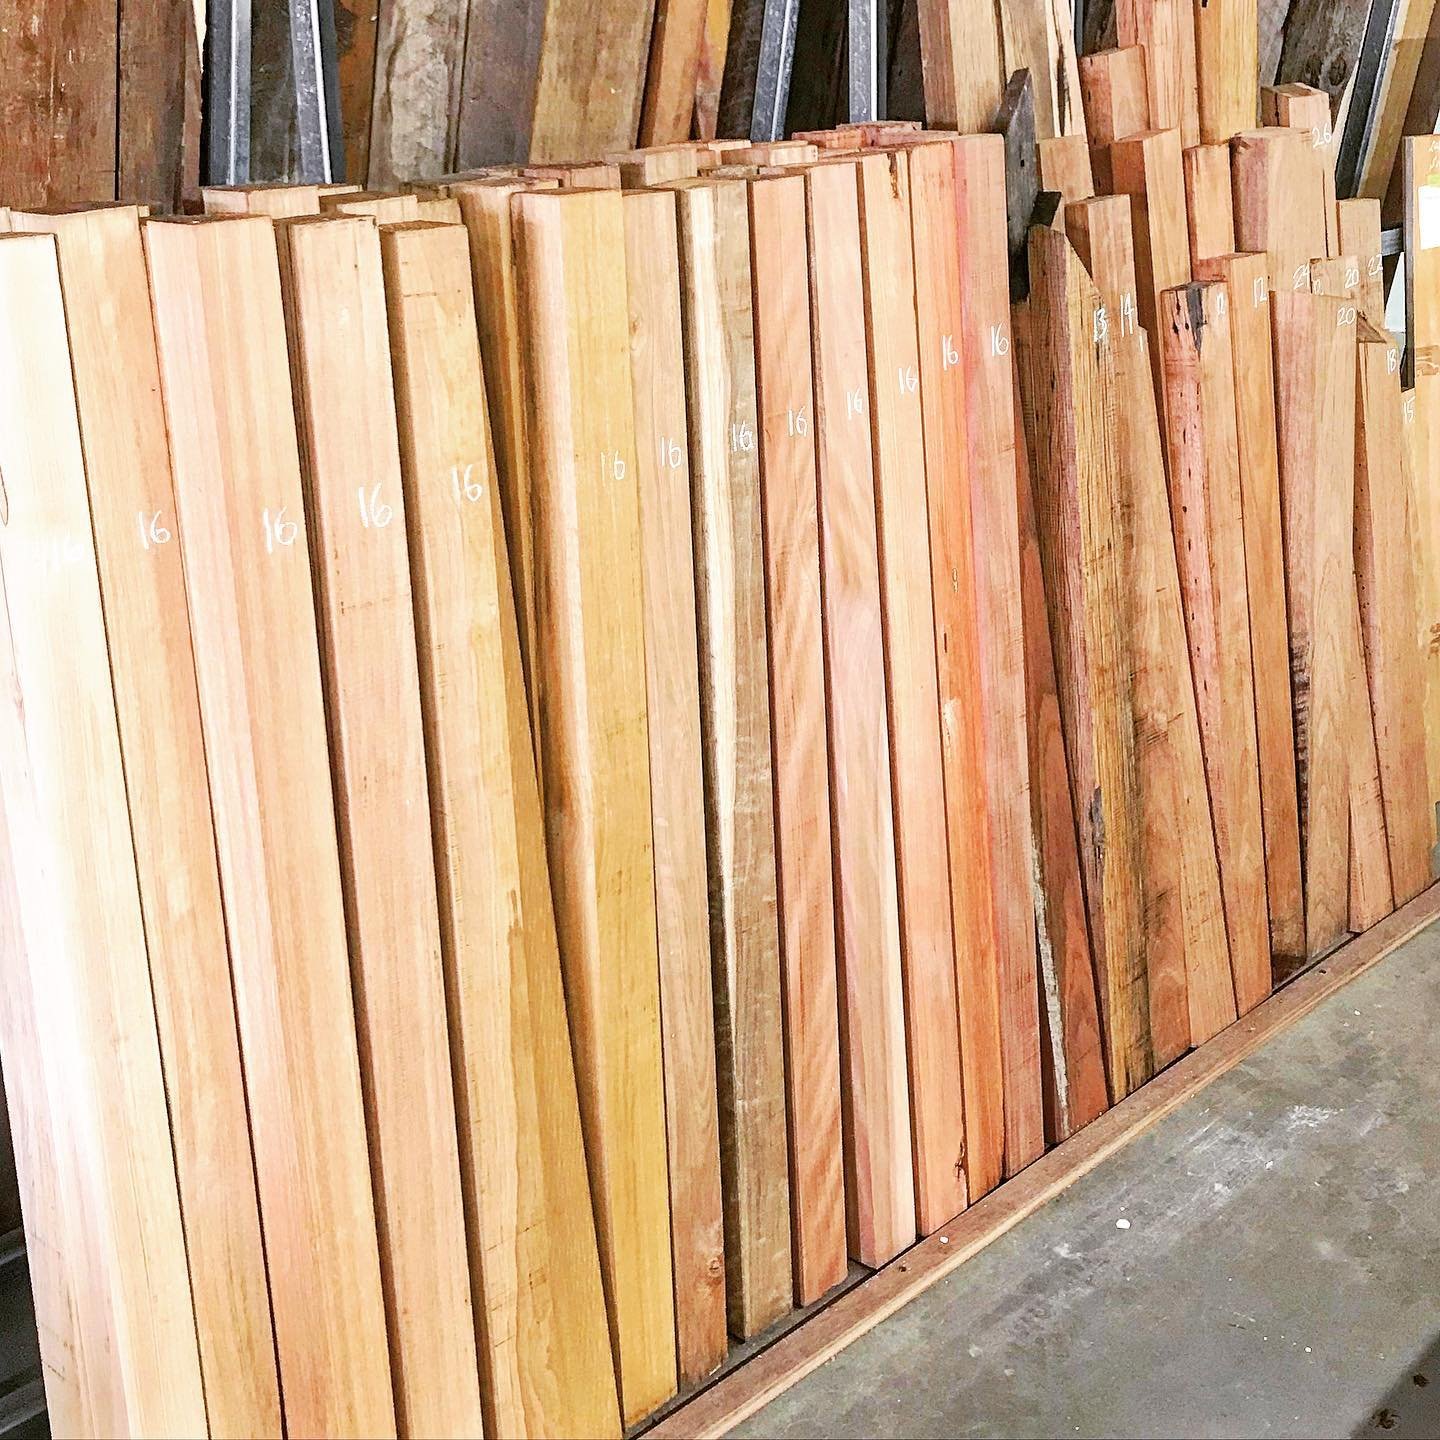 We stock dressed and undressed timber to suit any project, and can dress and machine timber to size.